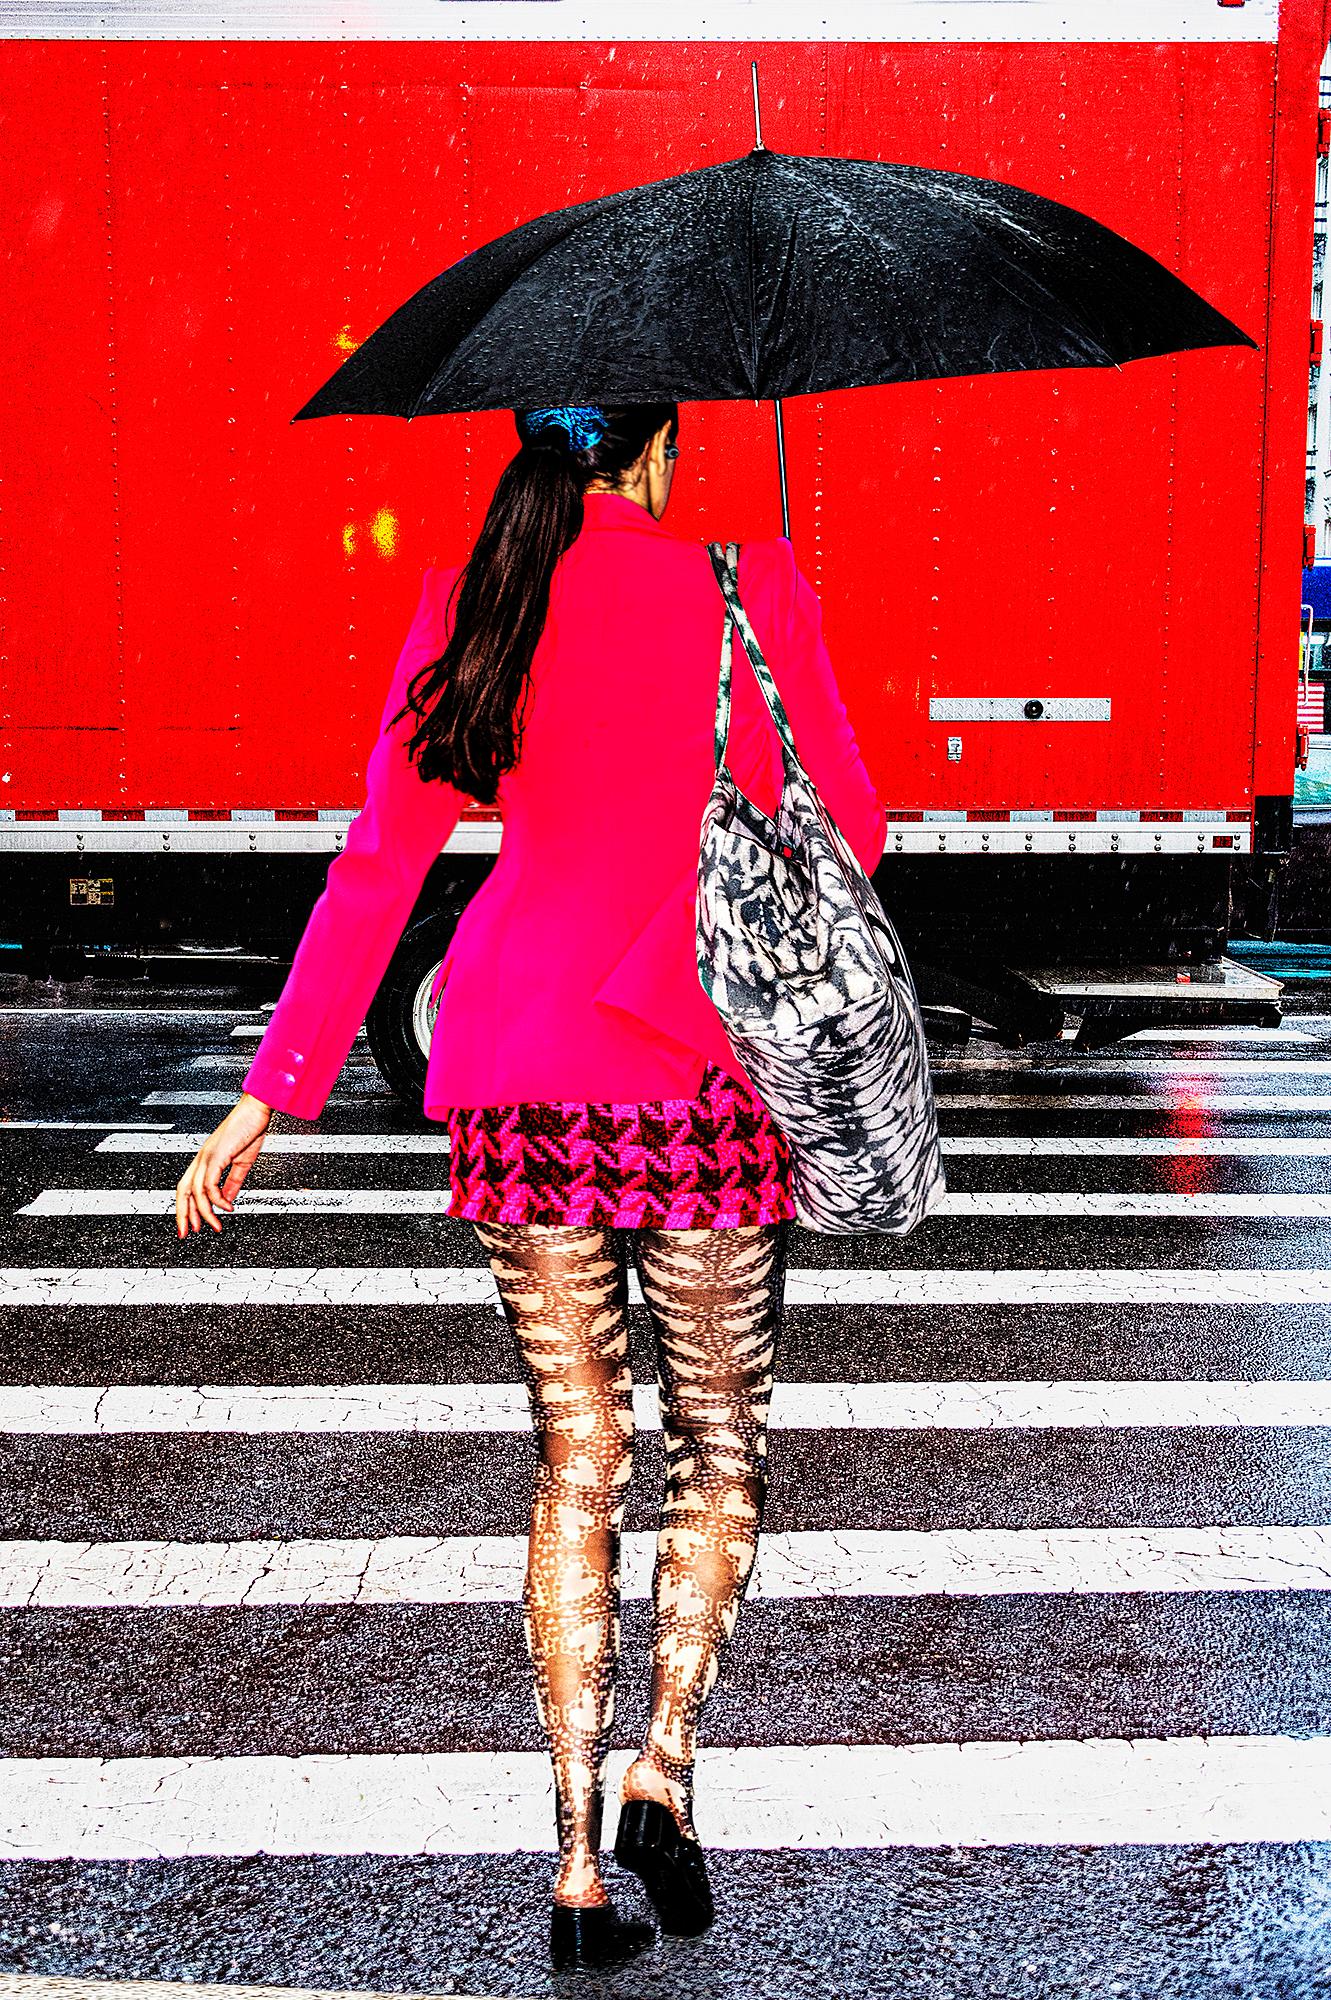 Mitchell Funk Figurative Photograph - Street Fashionista in Pink Ensemble on New York City Rainy Day 